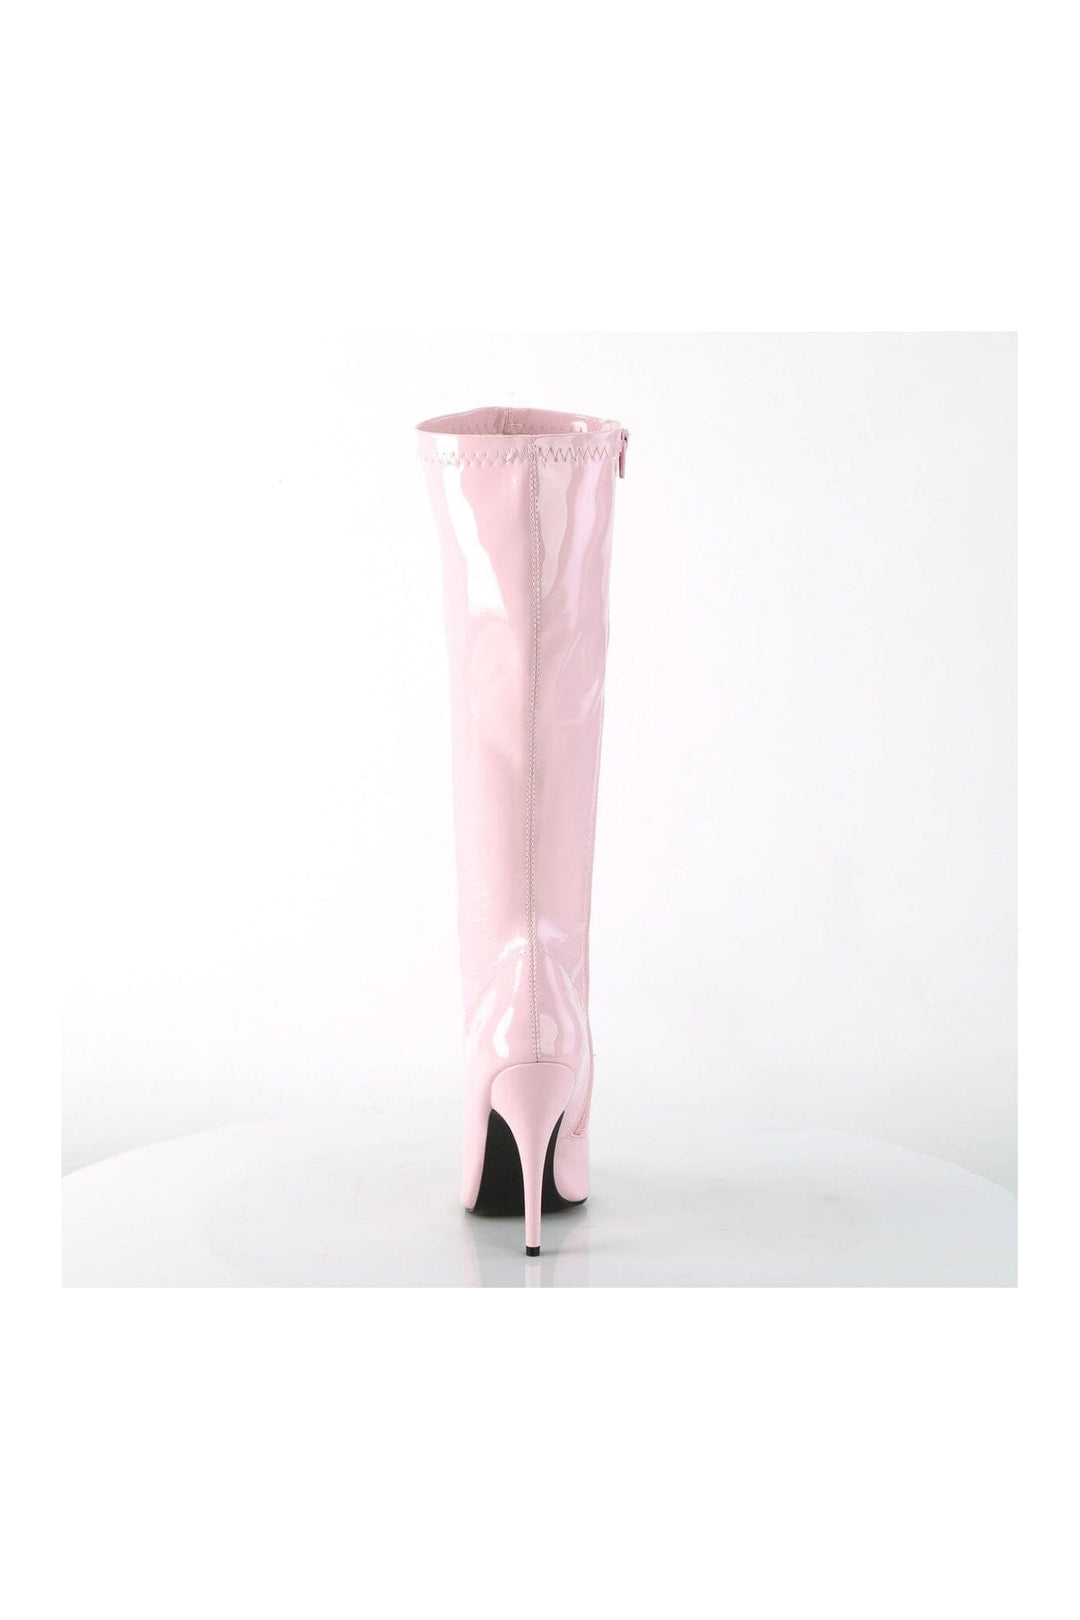 SEDUCE-2000 Pink Patent Knee Boot-Knee Boots- Stripper Shoes at SEXYSHOES.COM